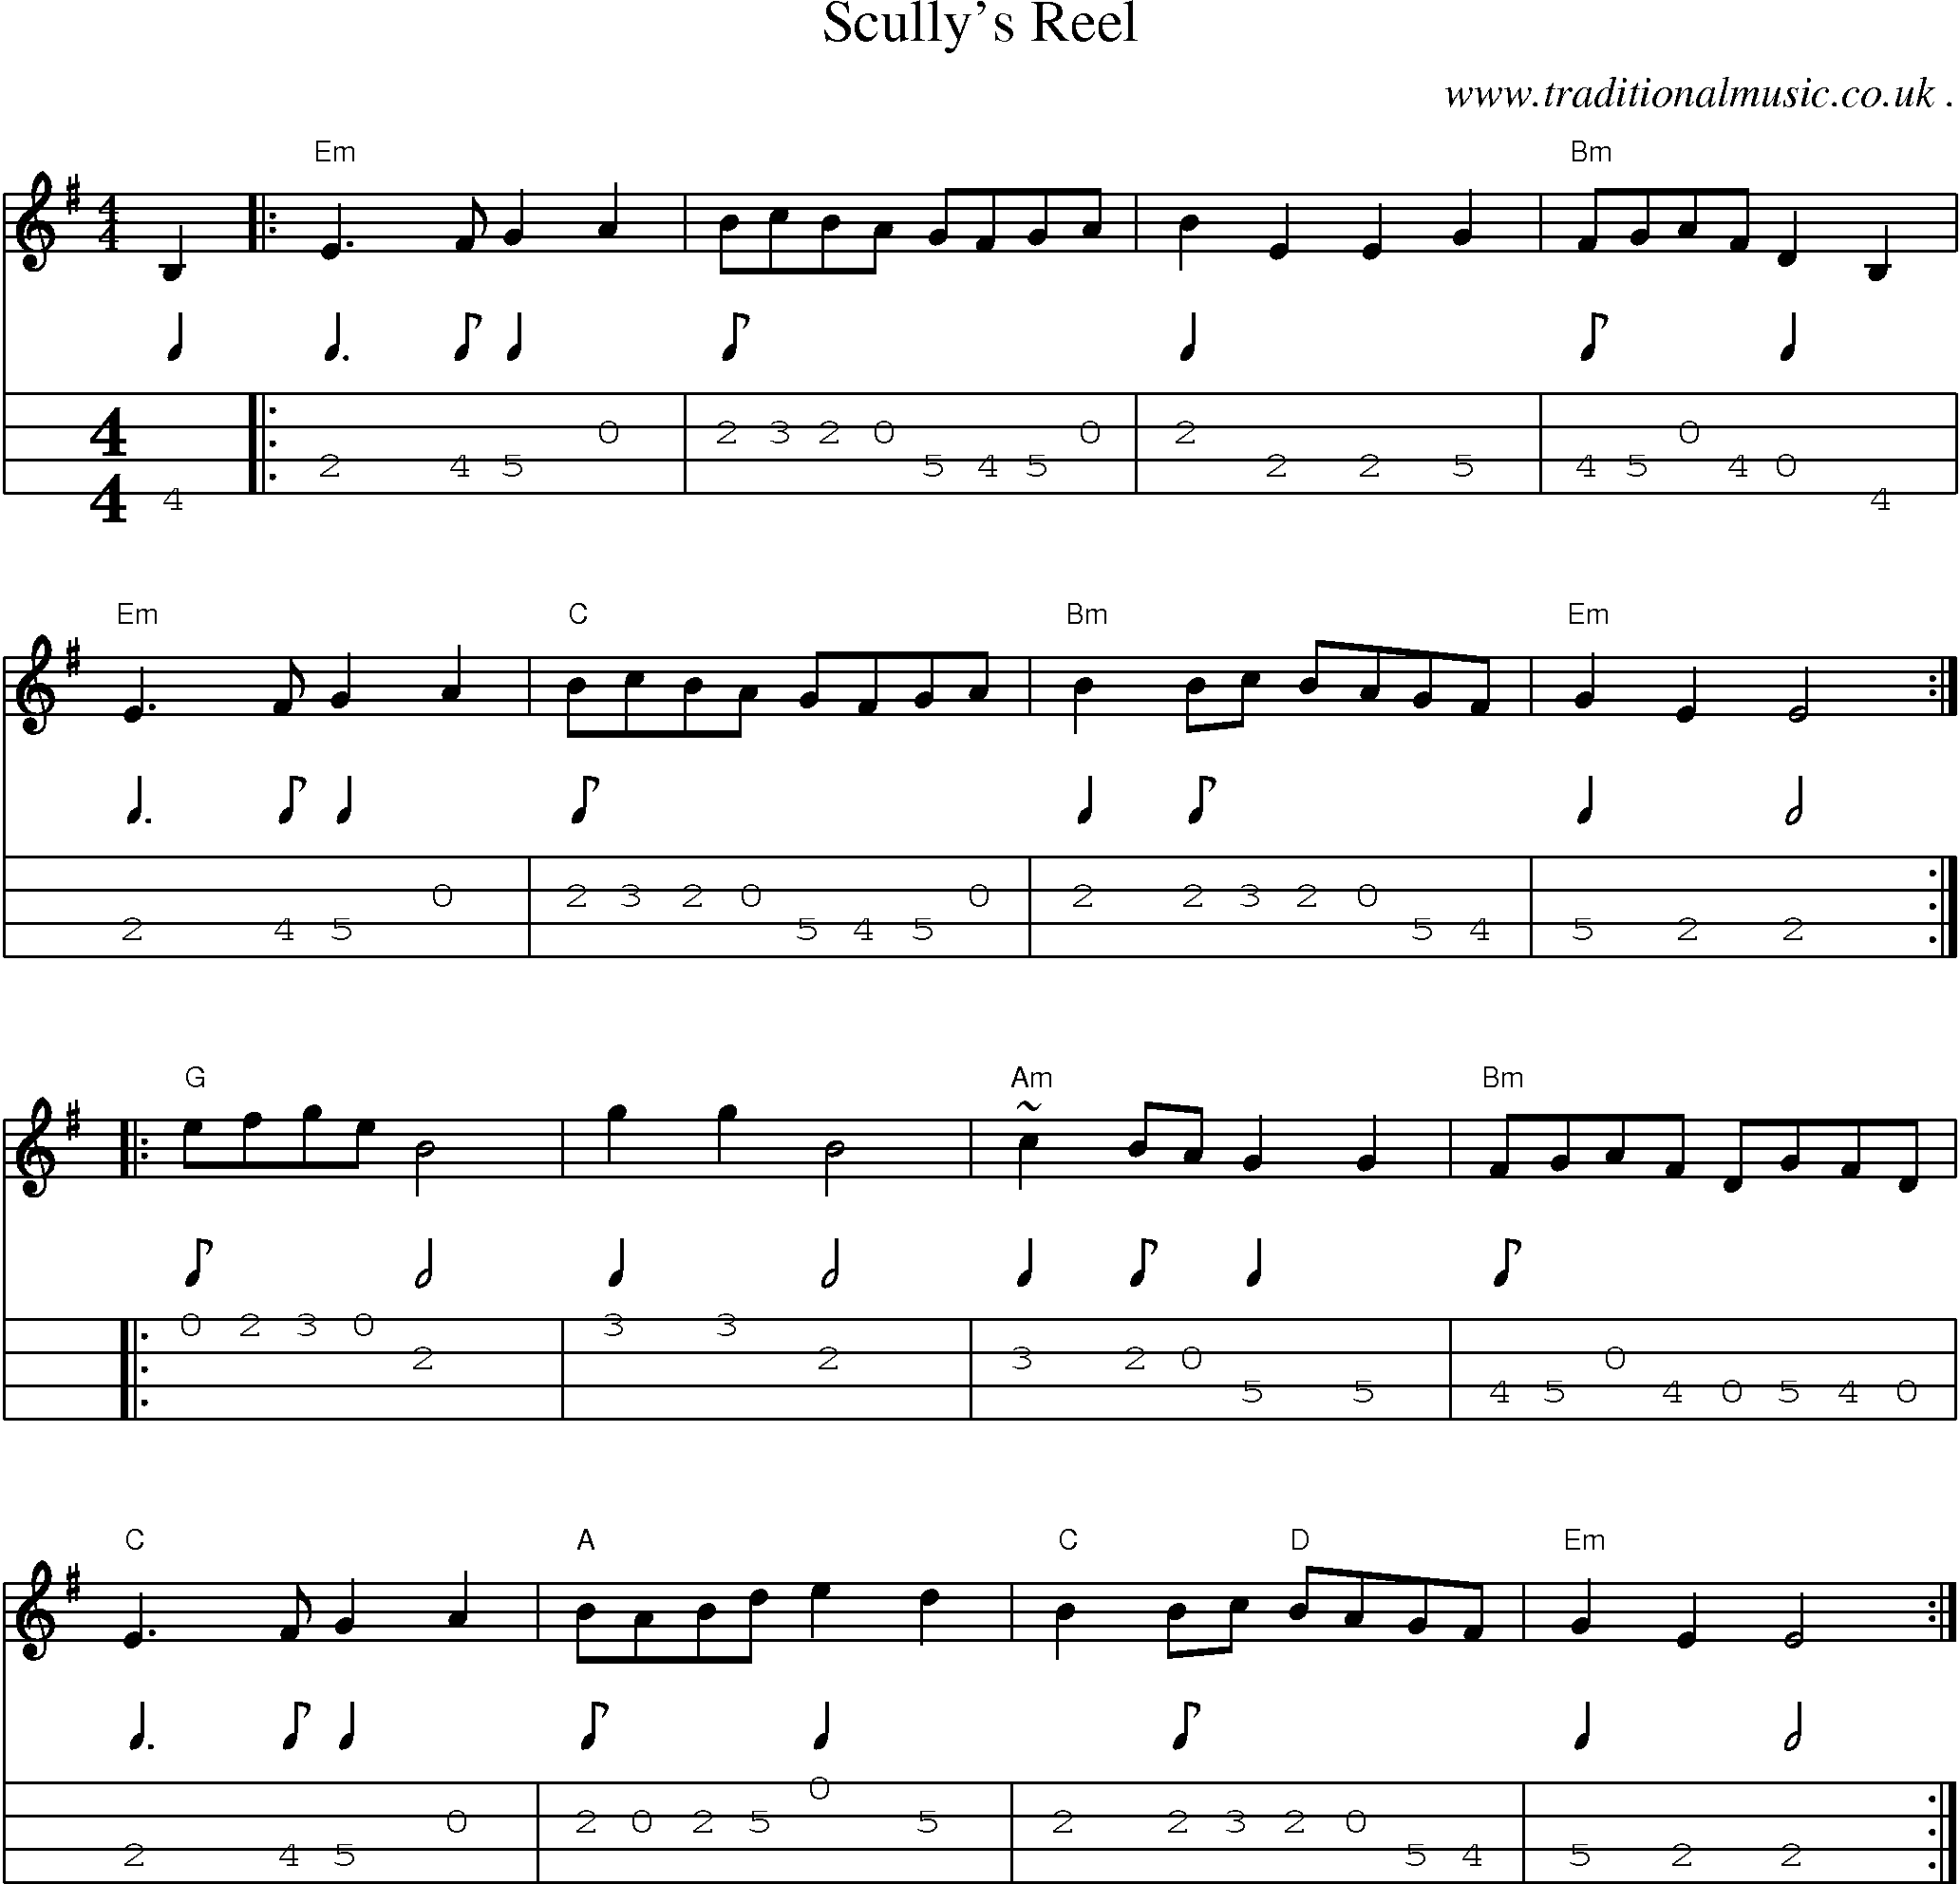 Music Score and Guitar Tabs for Scullys Reel